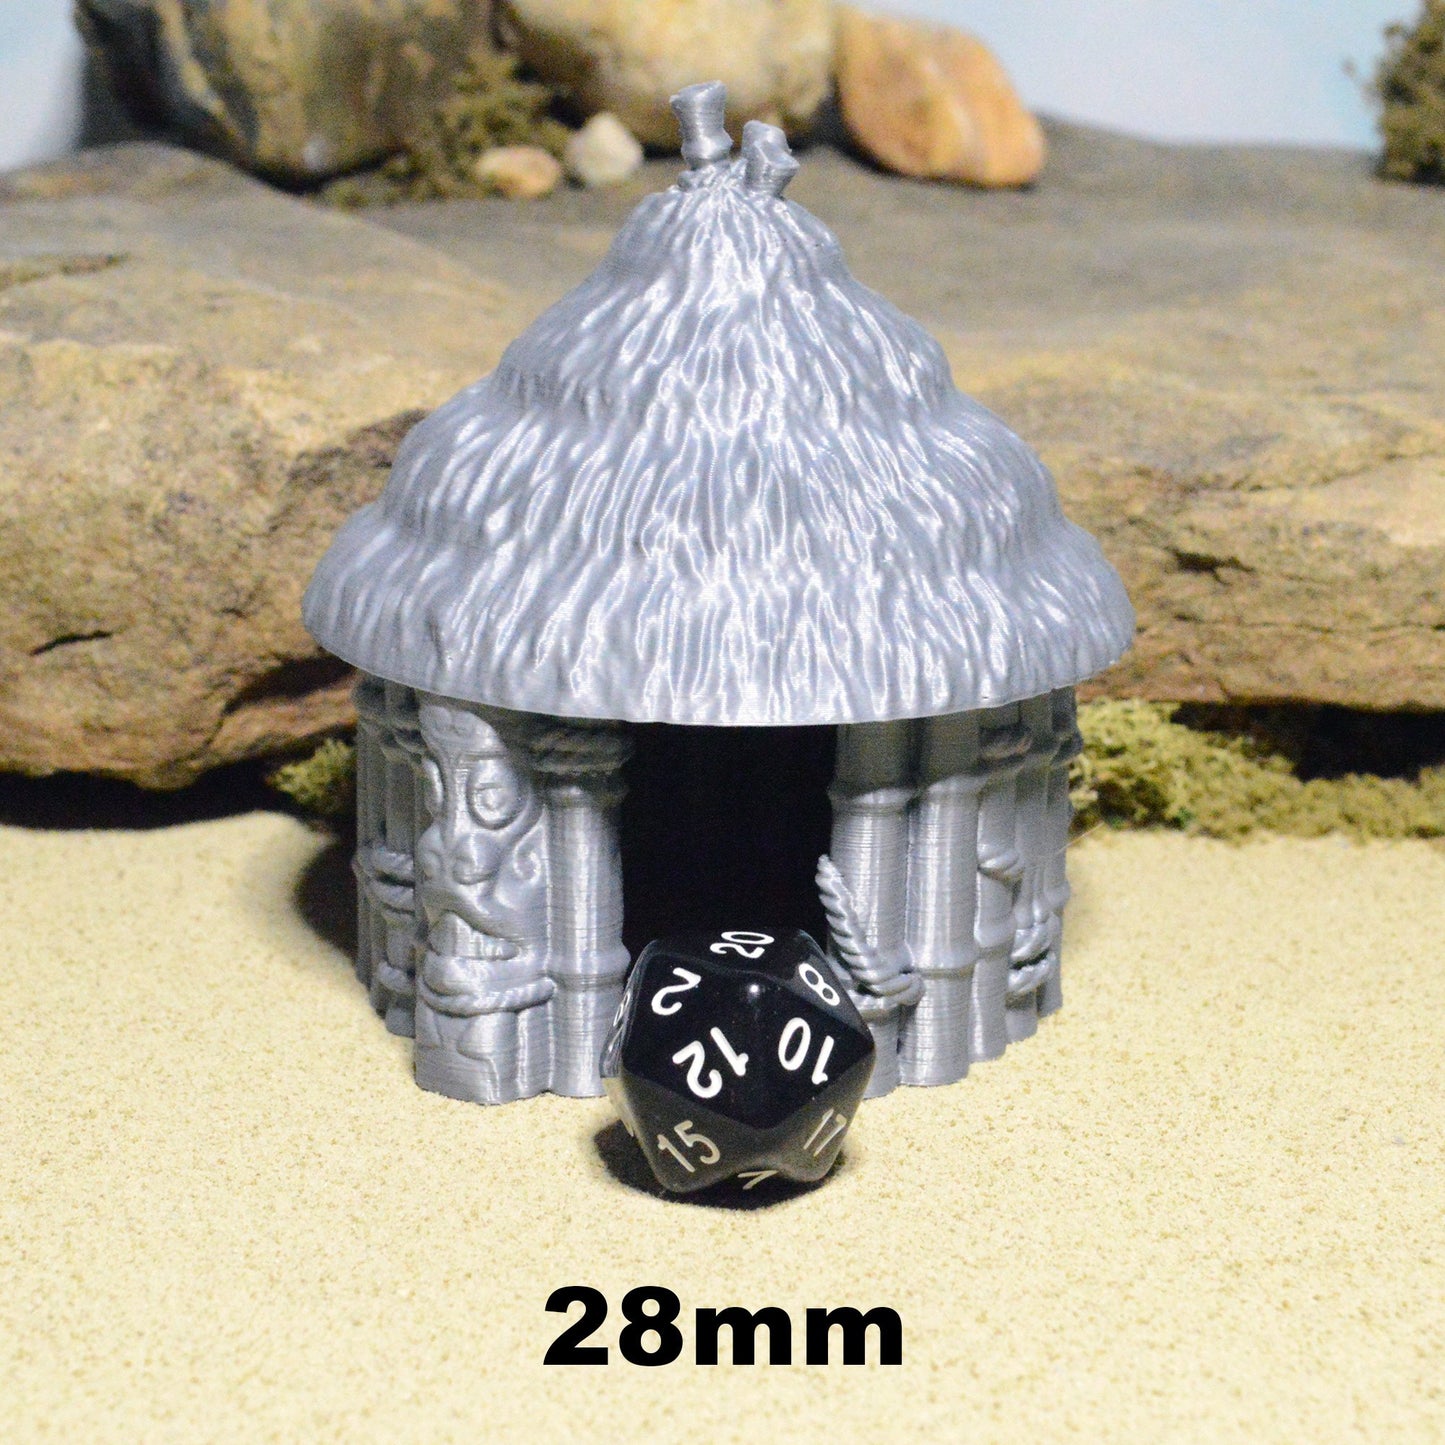 Bamboo Hut Small 28mm 32mm for D&D Terrain, DnD Pathfinder Tribal Coastal Village, Depths of Savage Atoll